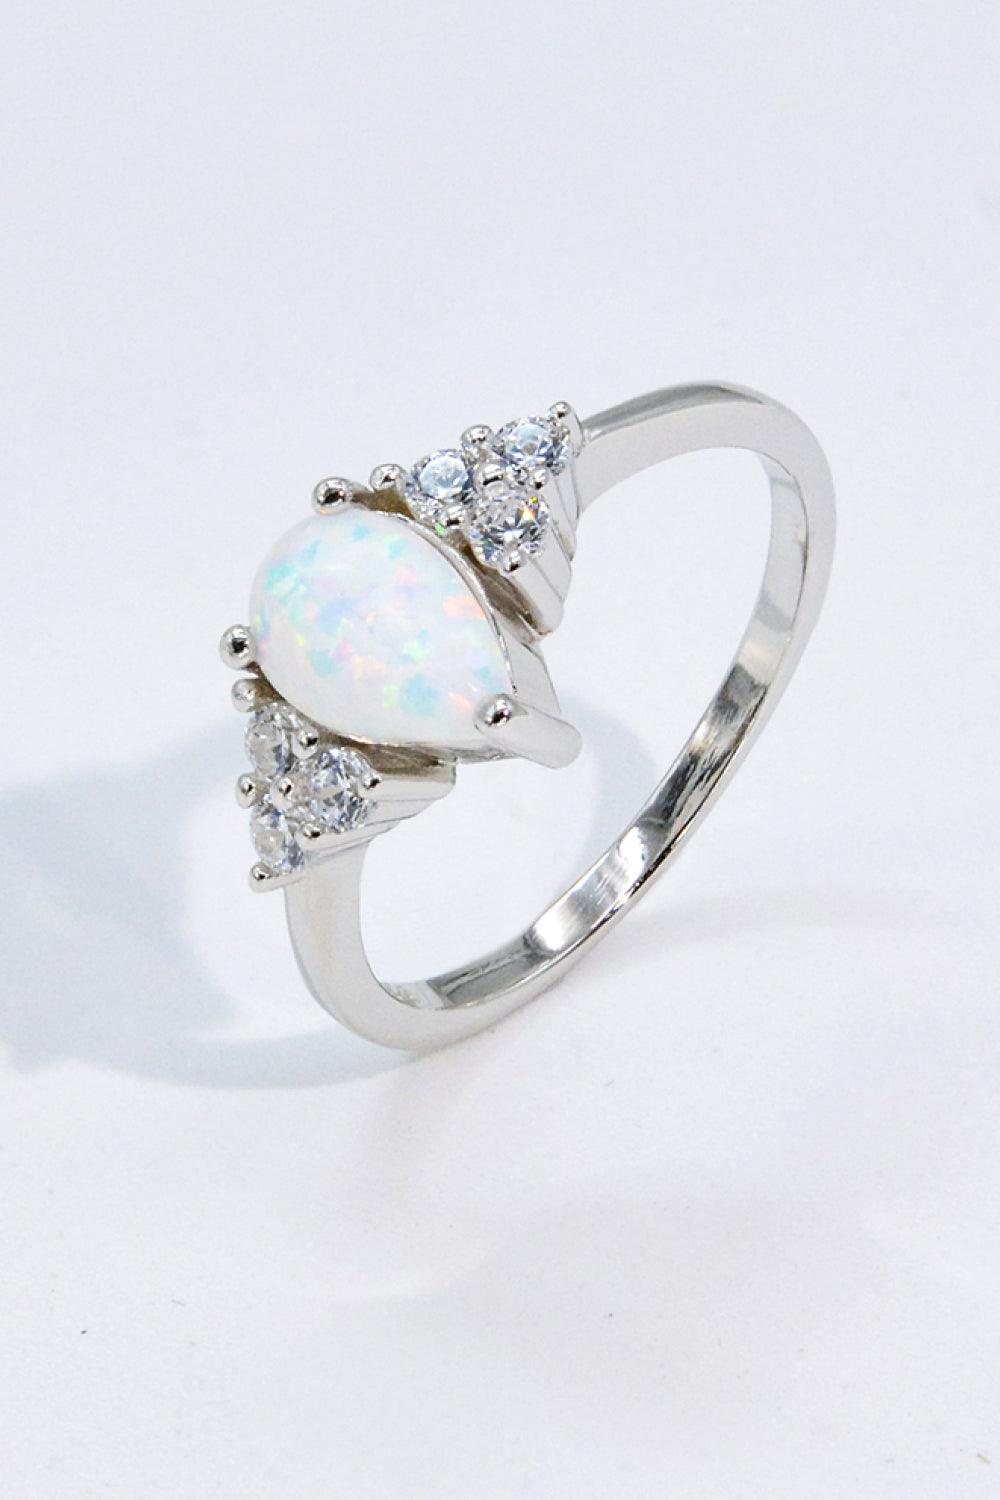 Limitless Love Opal and Zircon Ring - Flyclothing LLC